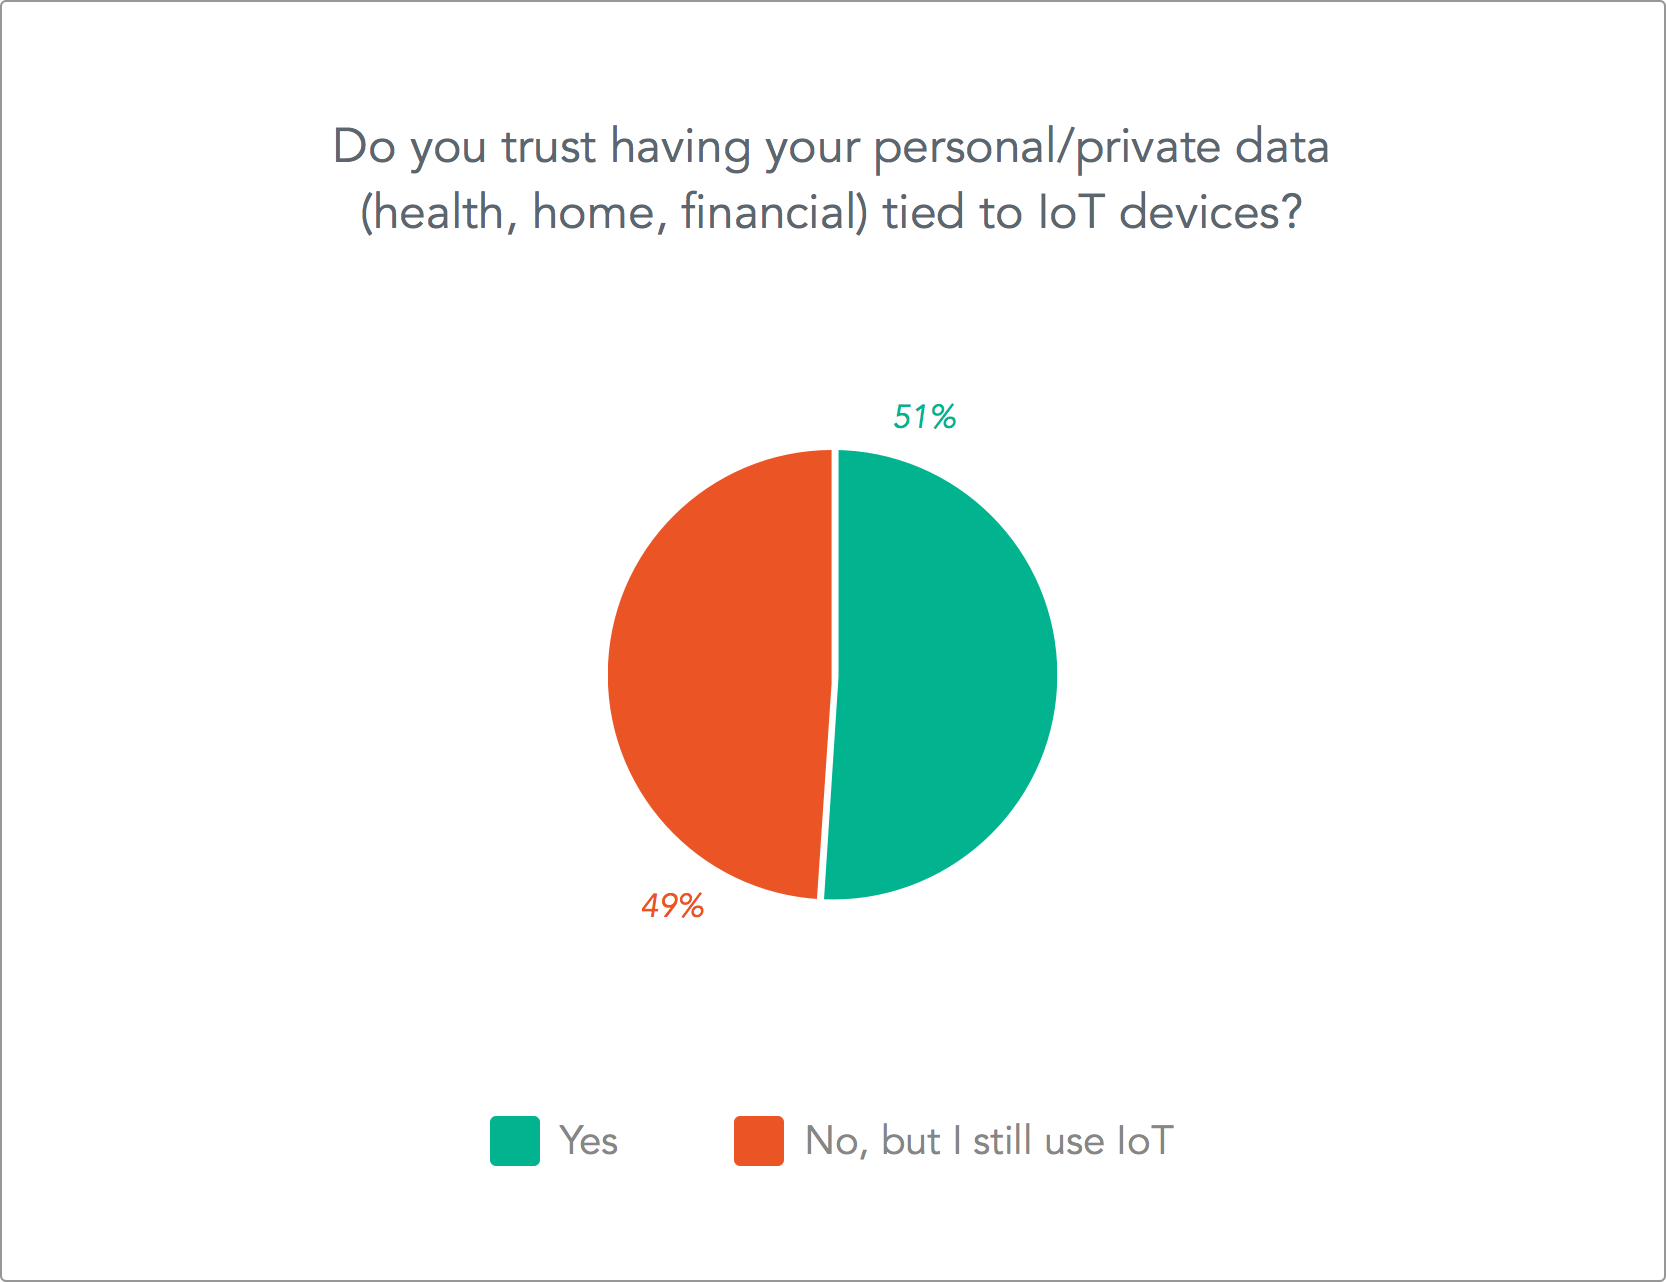 Do you trust your personal data tied to an IoT device?